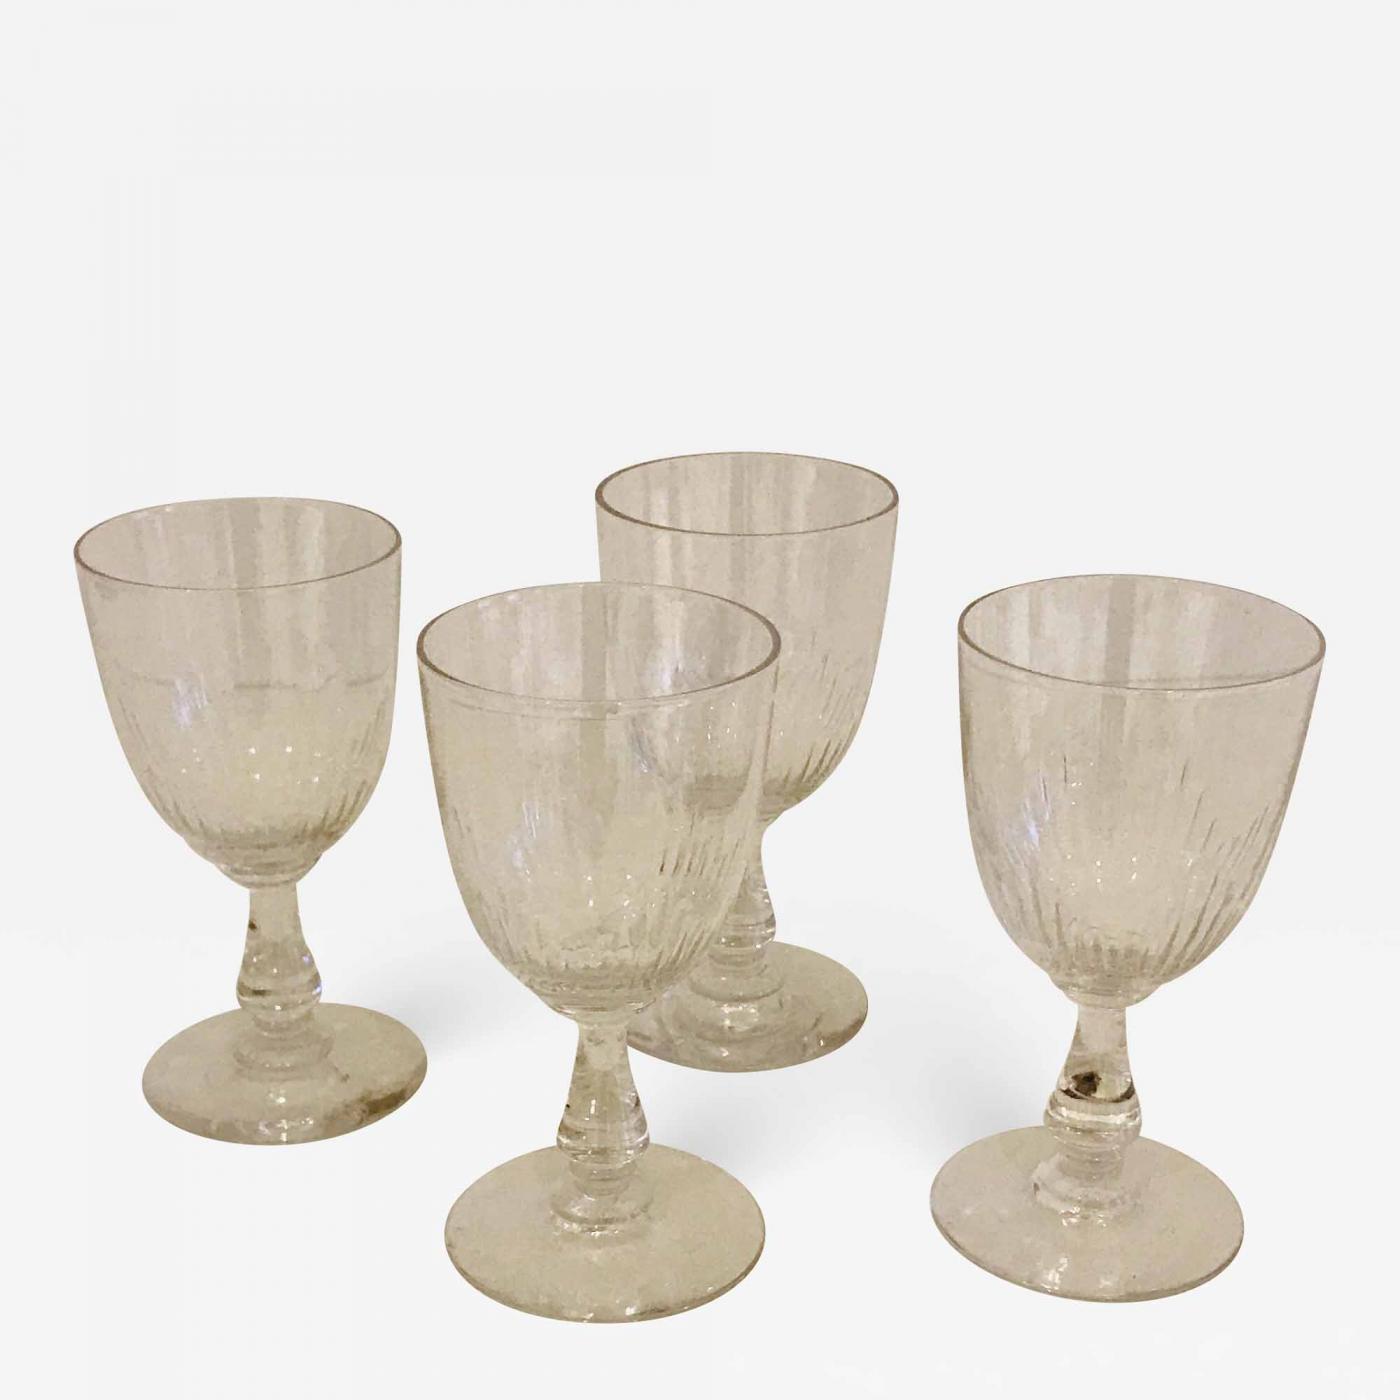 https://cdn.incollect.com/sites/default/files/zoom/-Baccarat-A-set-of-4-Baccarat-wine-glasses-circa-1920-584264-2758651.jpg